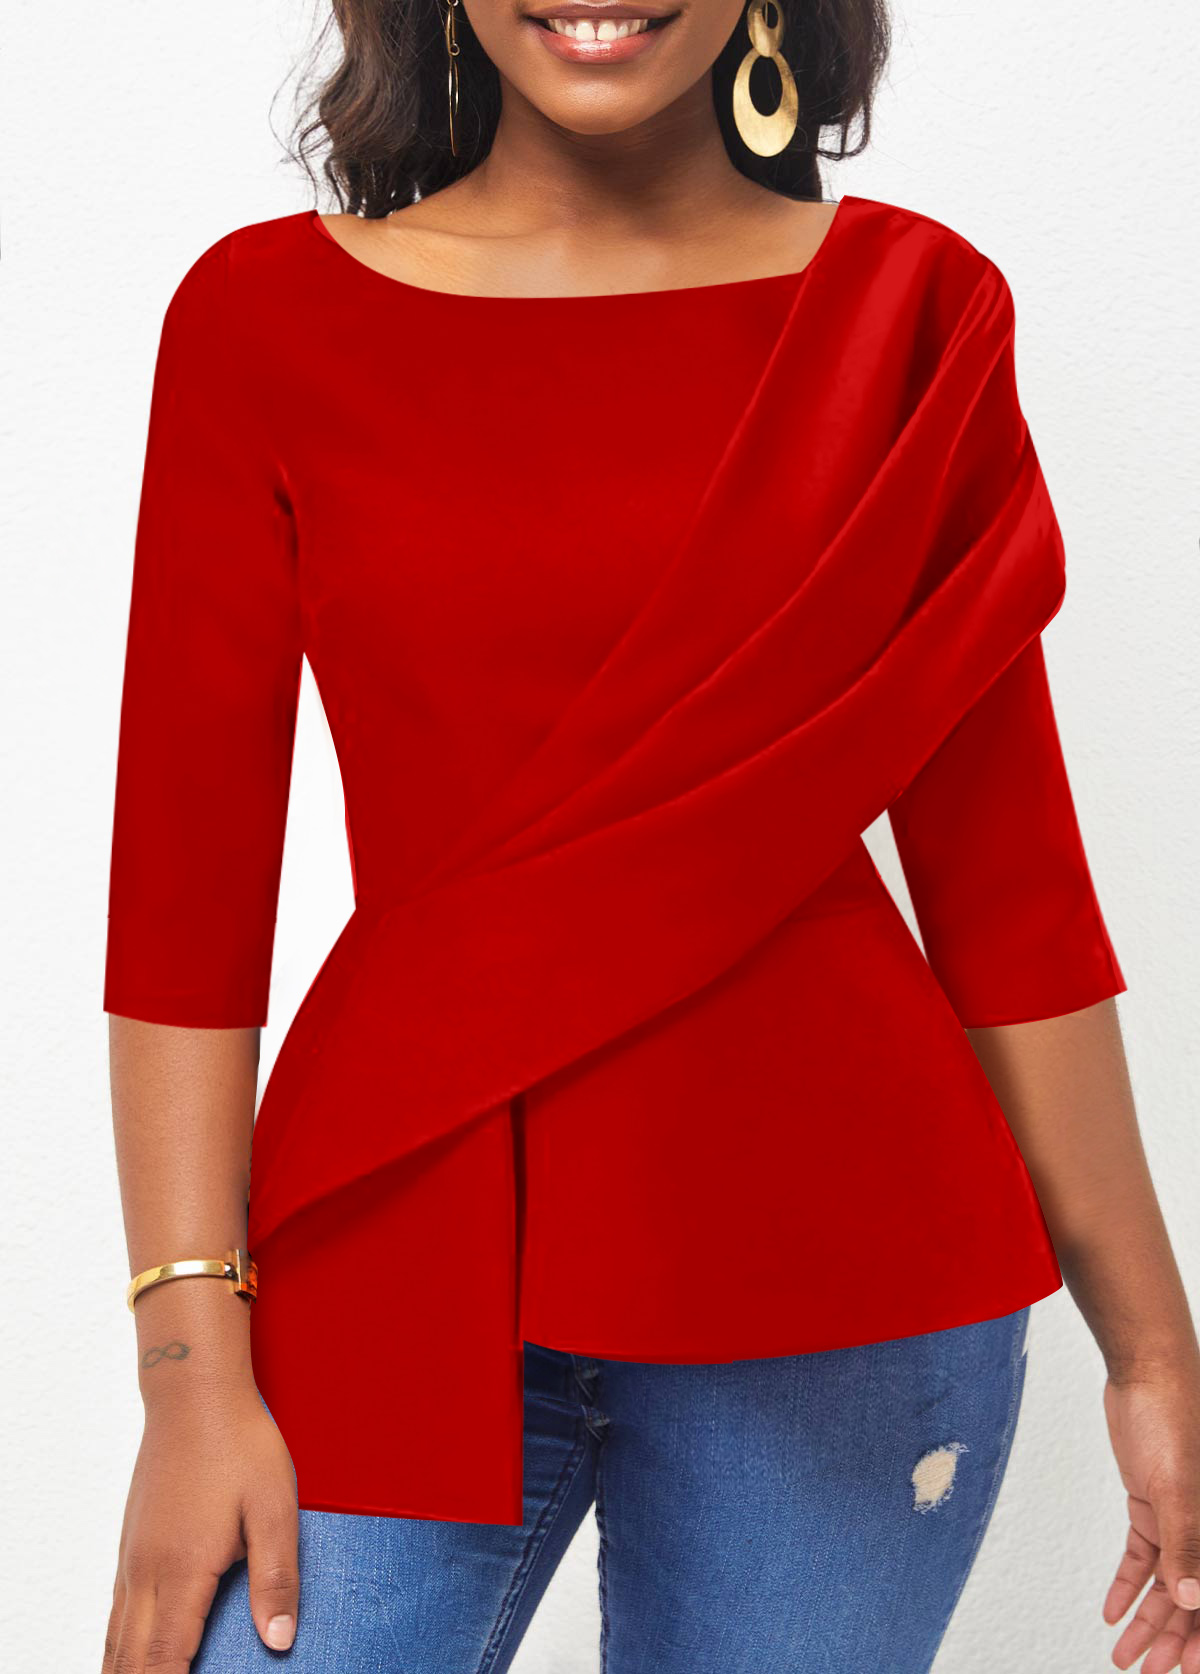 ROTITA Asymmetry Red Boat Neck 3/4 Sleeve Blouse